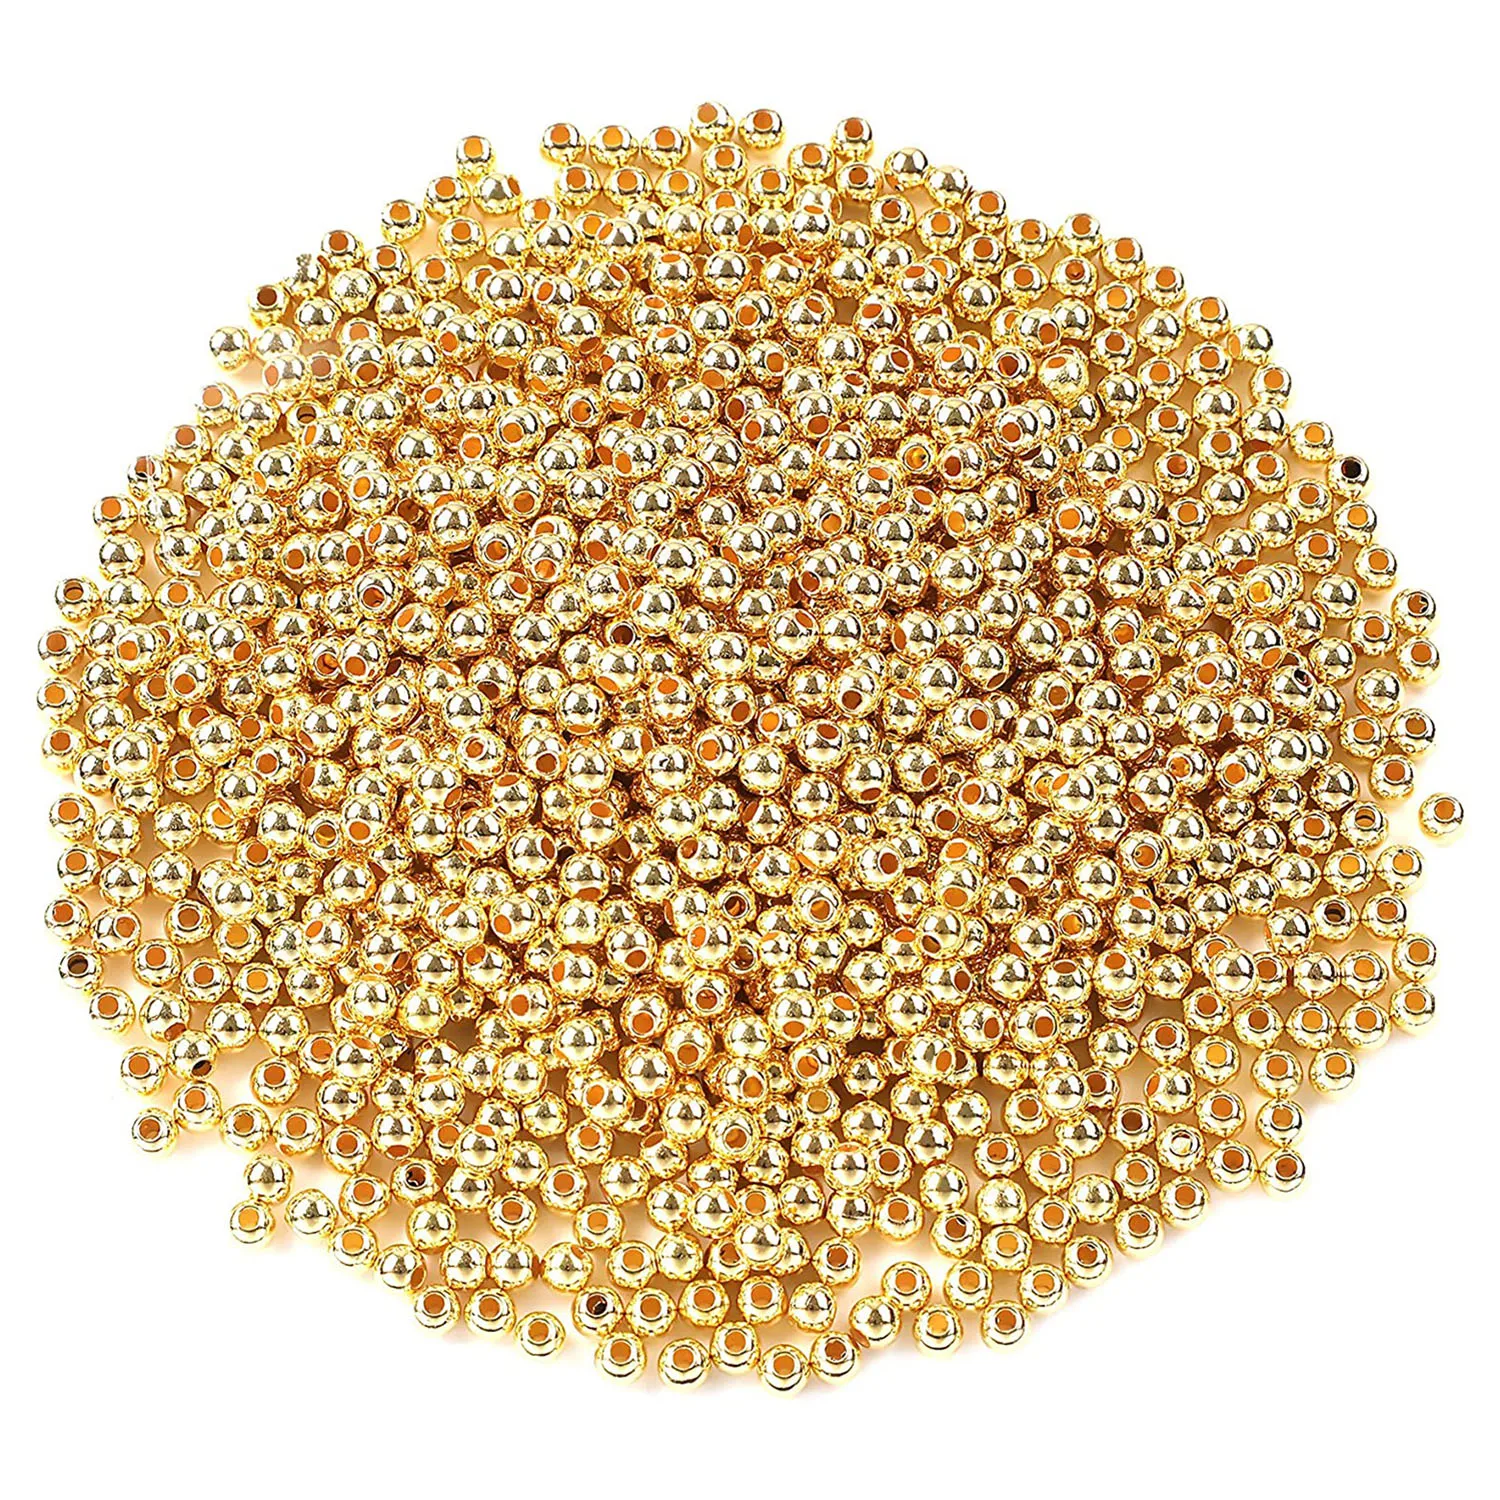 

500Pcs 4mm Round CCB Beads Gold Plated CCB Spacer Loose Ball Beads for Bracelet Necklace Jewelry Making Handmade Crafts Supplies